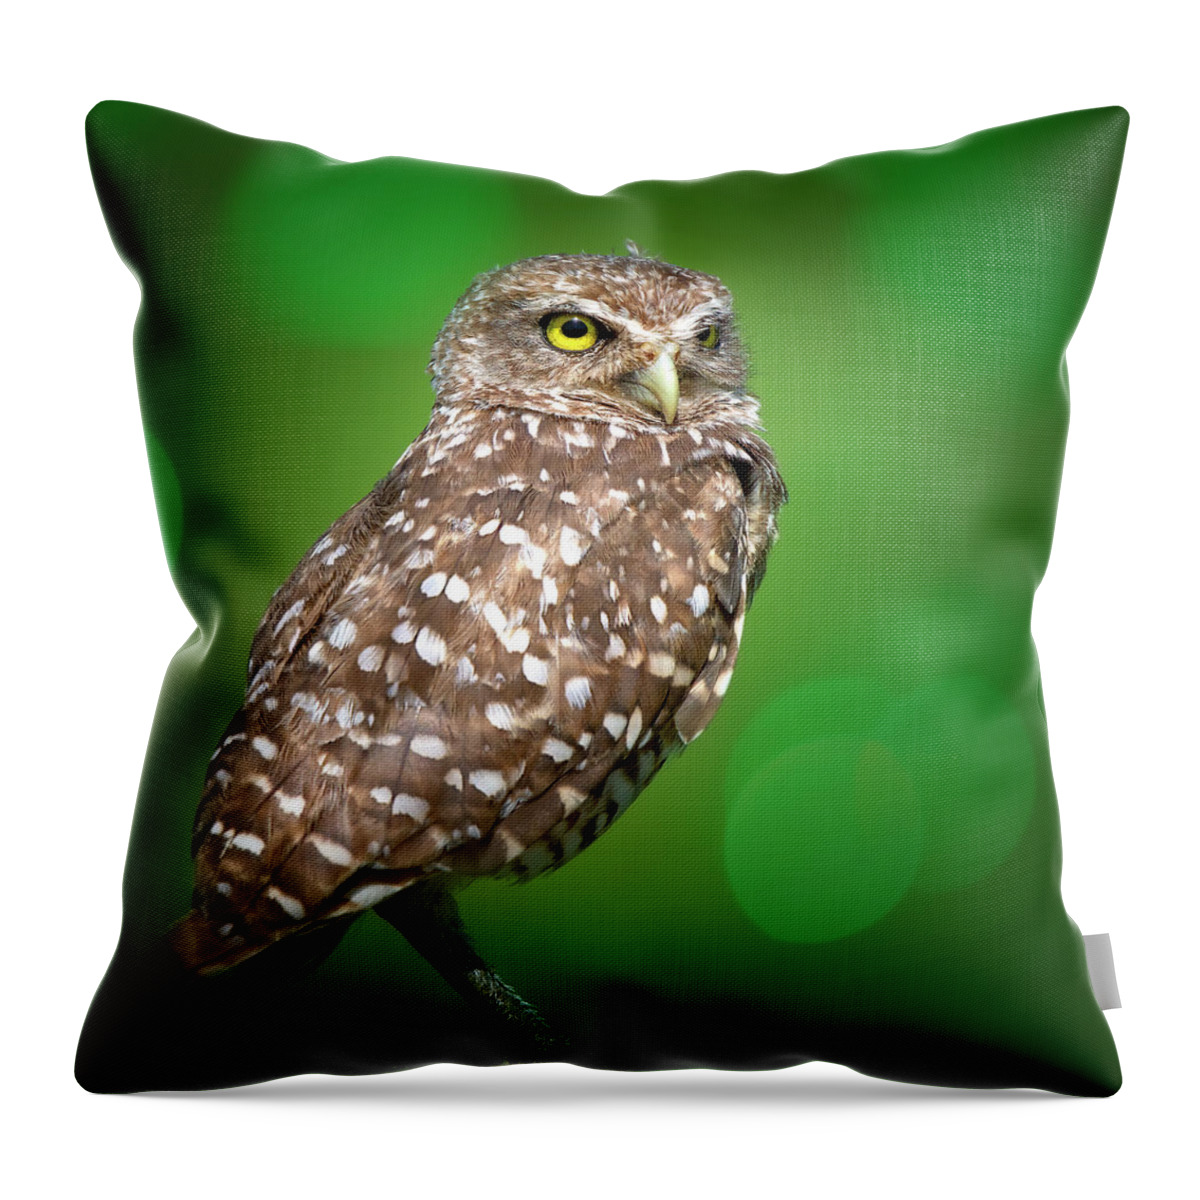 Owl Throw Pillow featuring the photograph Portrait of a Burrowing Owl by Mark Andrew Thomas